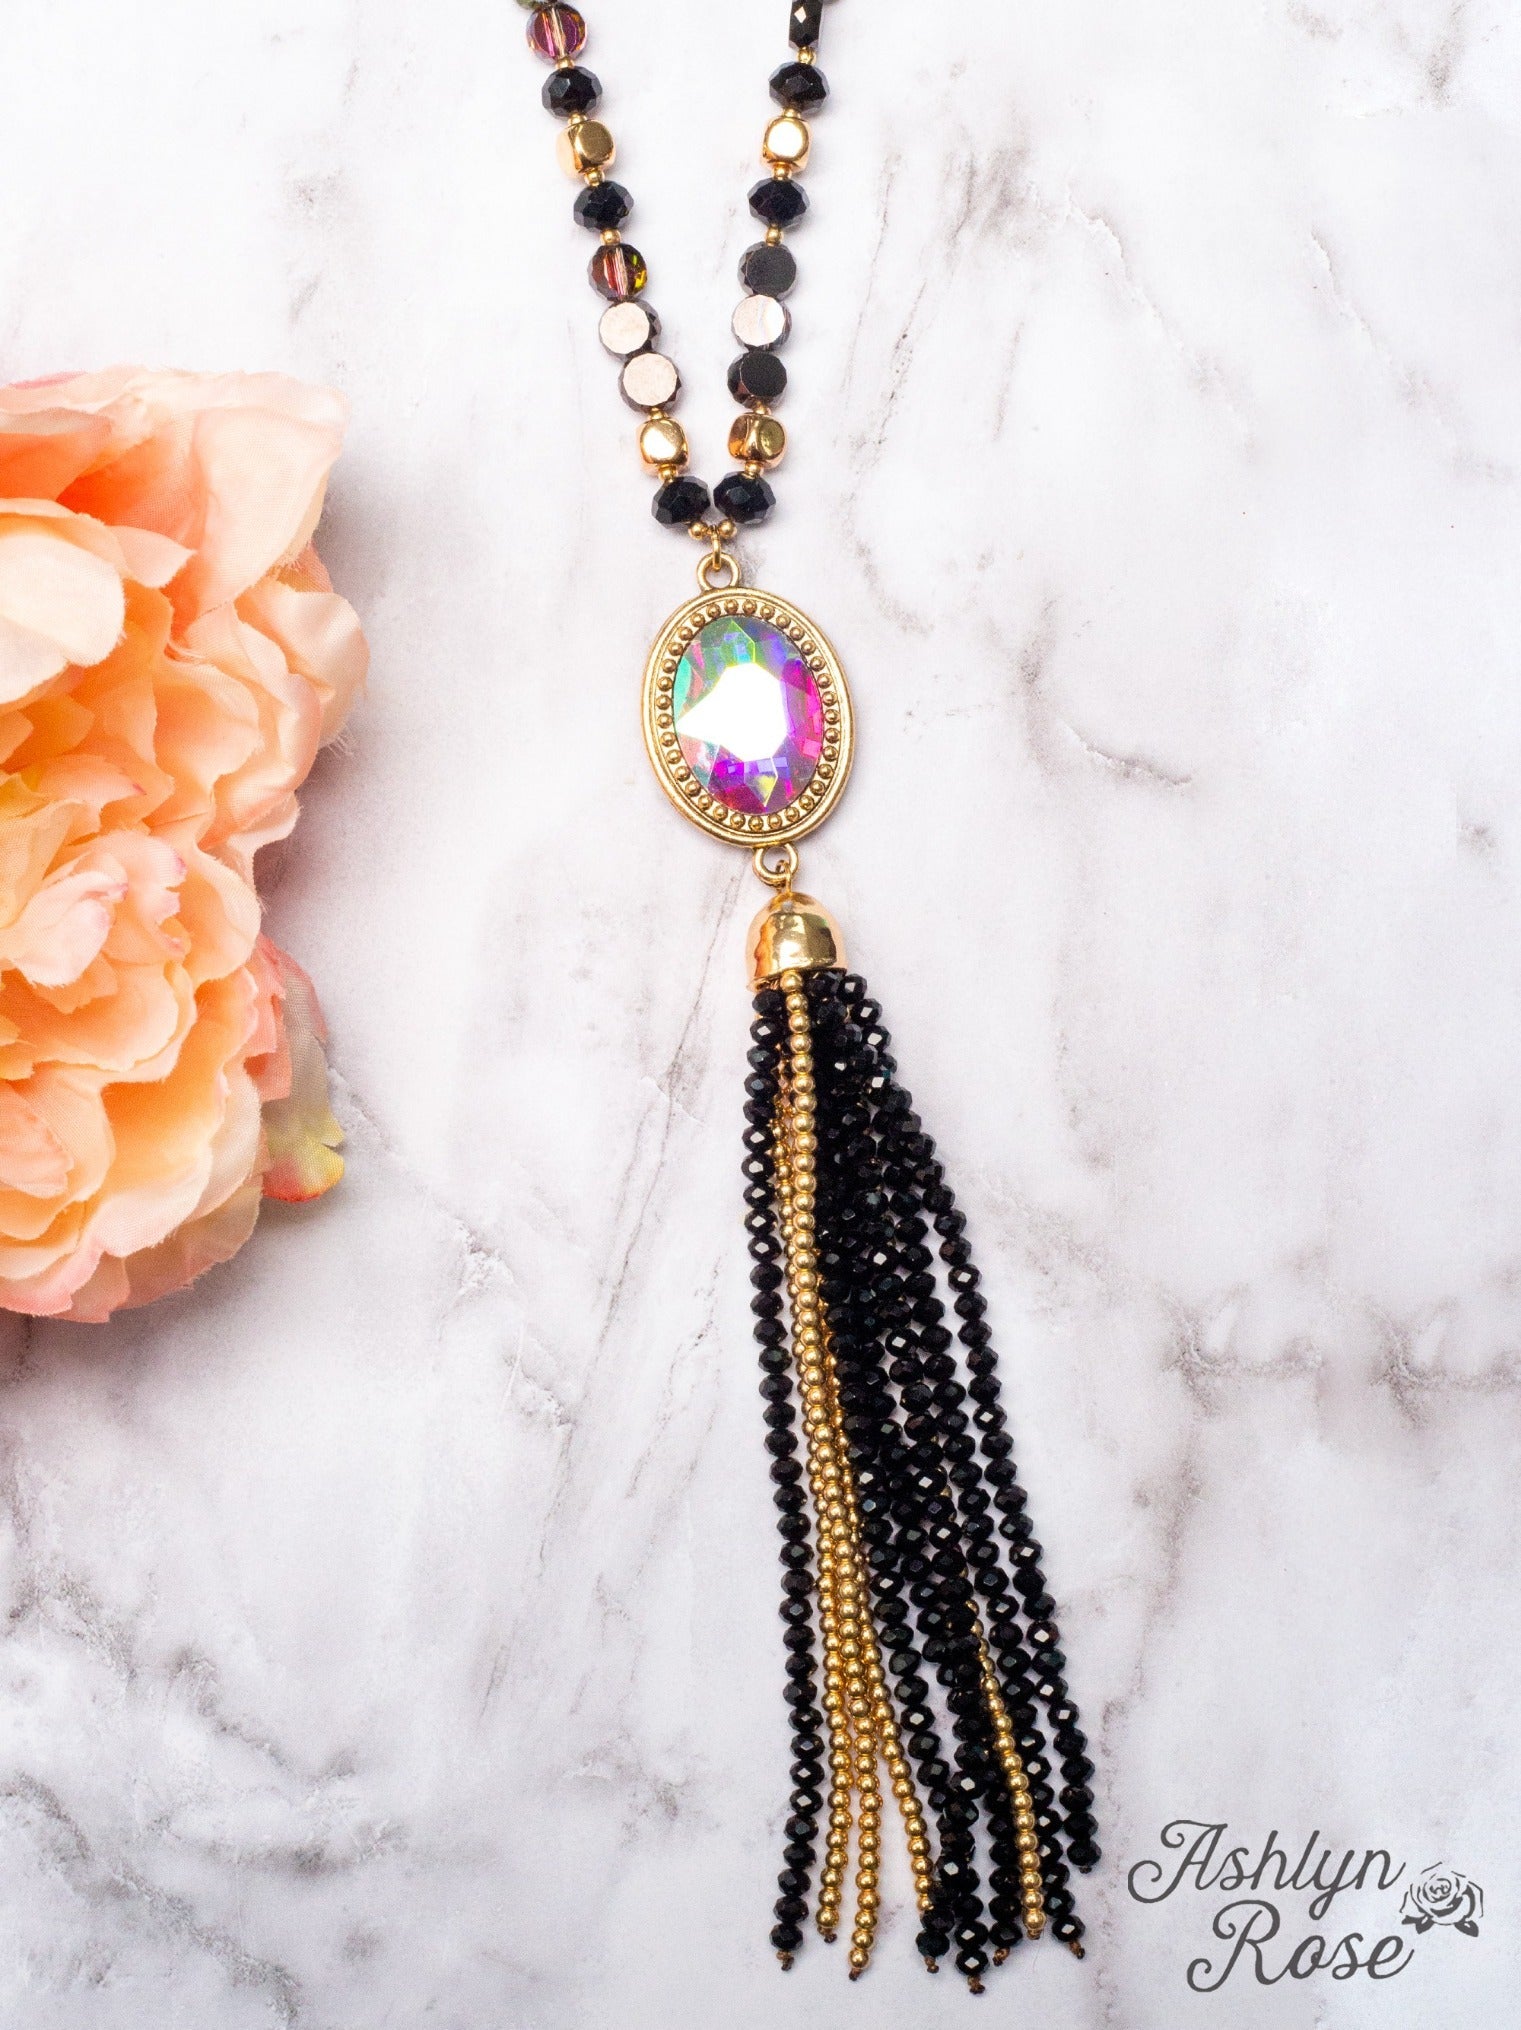 CRASH MY PARTY OVAL IRIDESCENT CRYSTAL BEADED TASSEL PENDANT ON A CRYSTAL BEADED GOLD LINKED CHAIN NECKLACE, BLACK